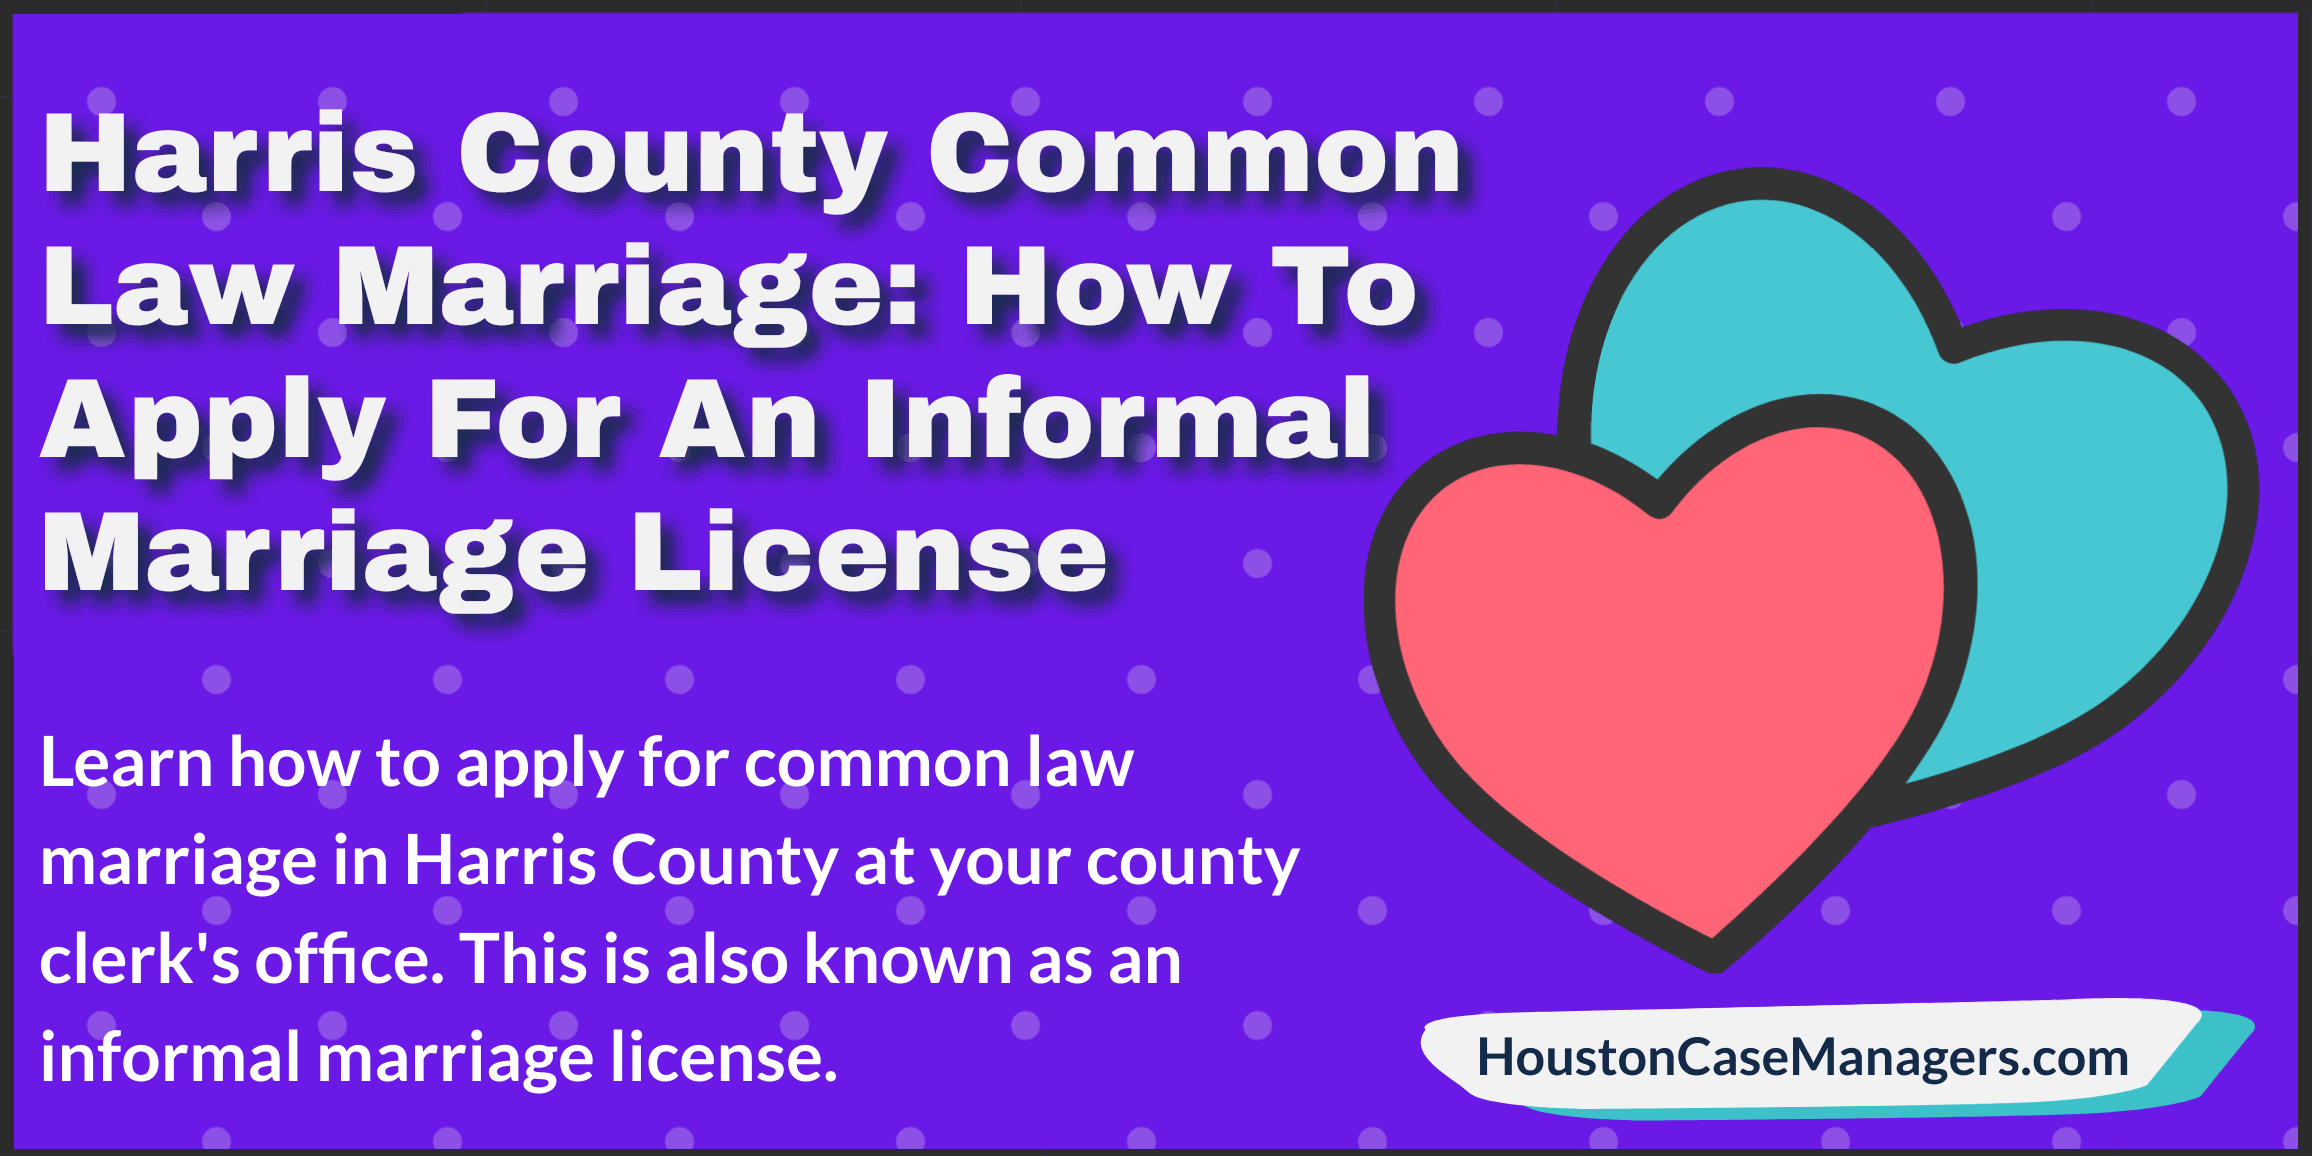 Harris County Common Law Marriage